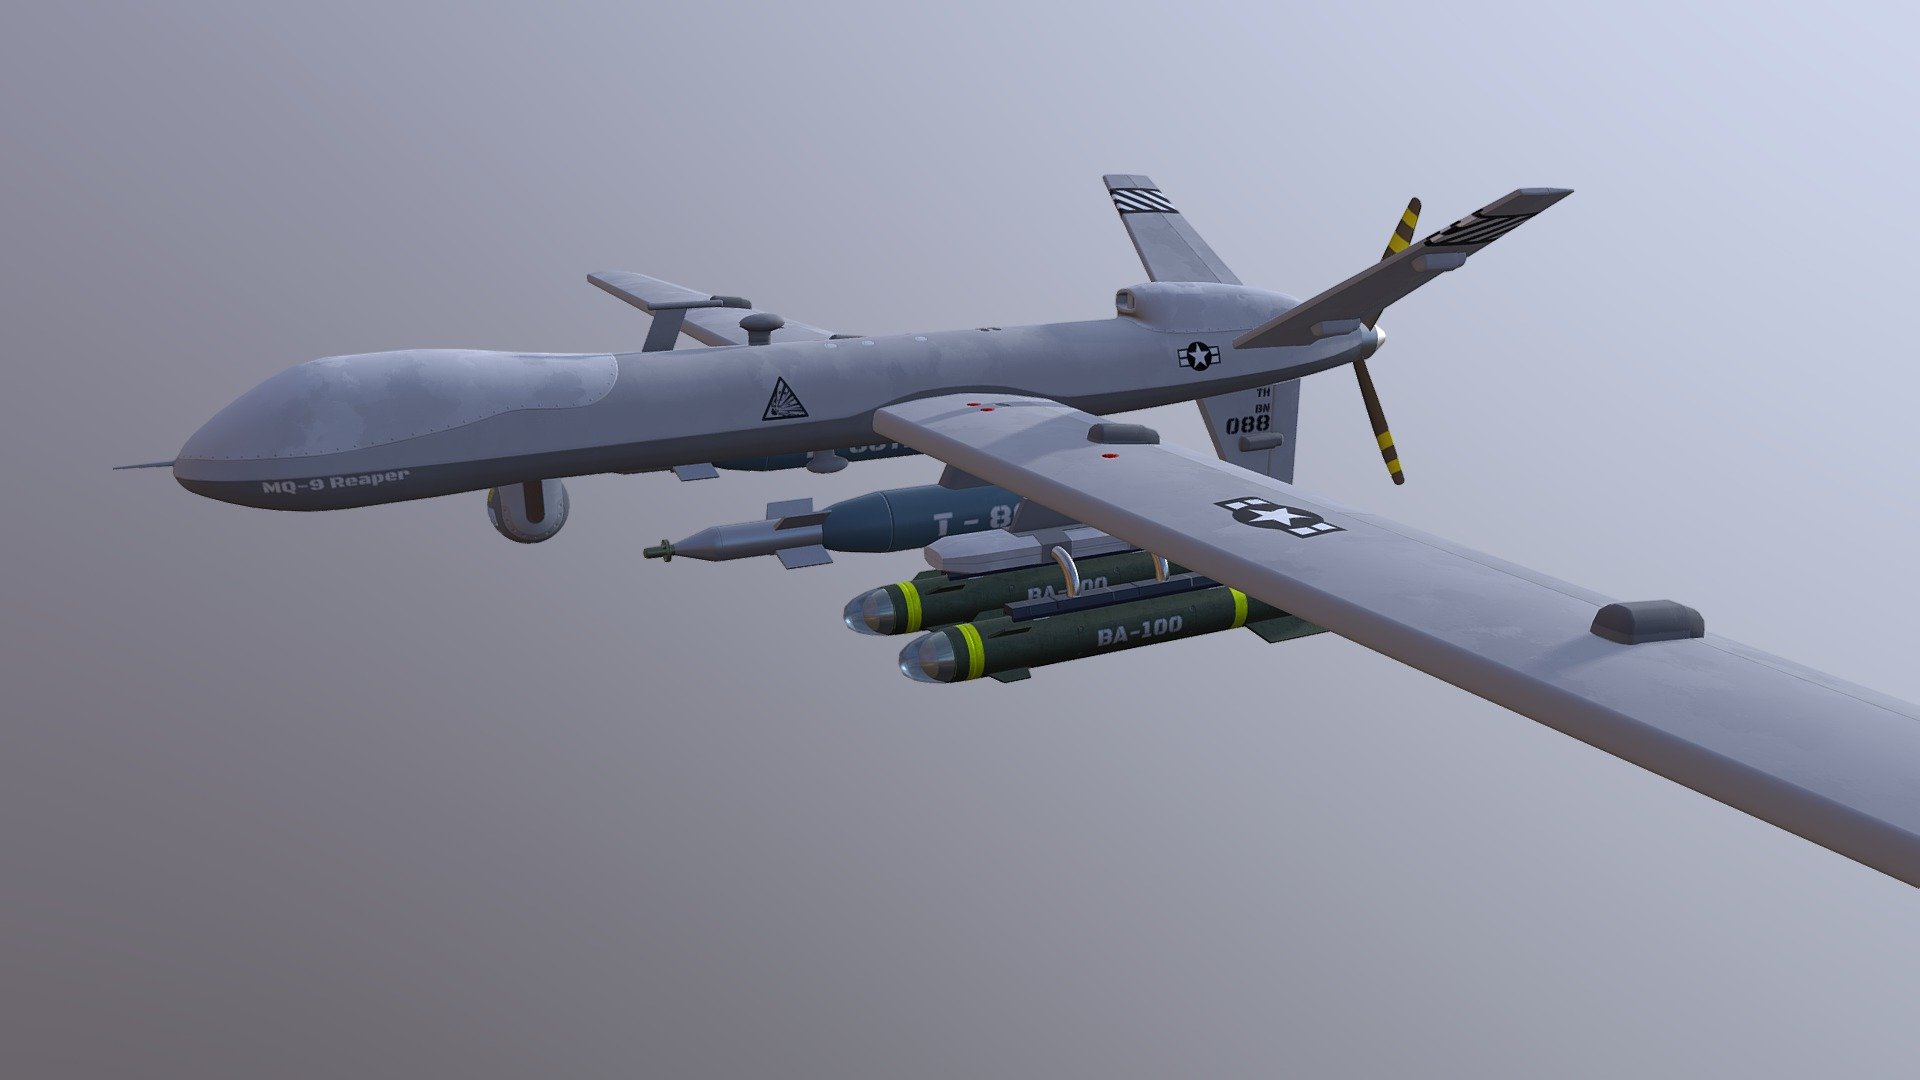 I wanted to create a UAV and I picked the MQ-9 Reaper made by General Atomics. Modeled in Maya and textured in Substance Painter 3d model